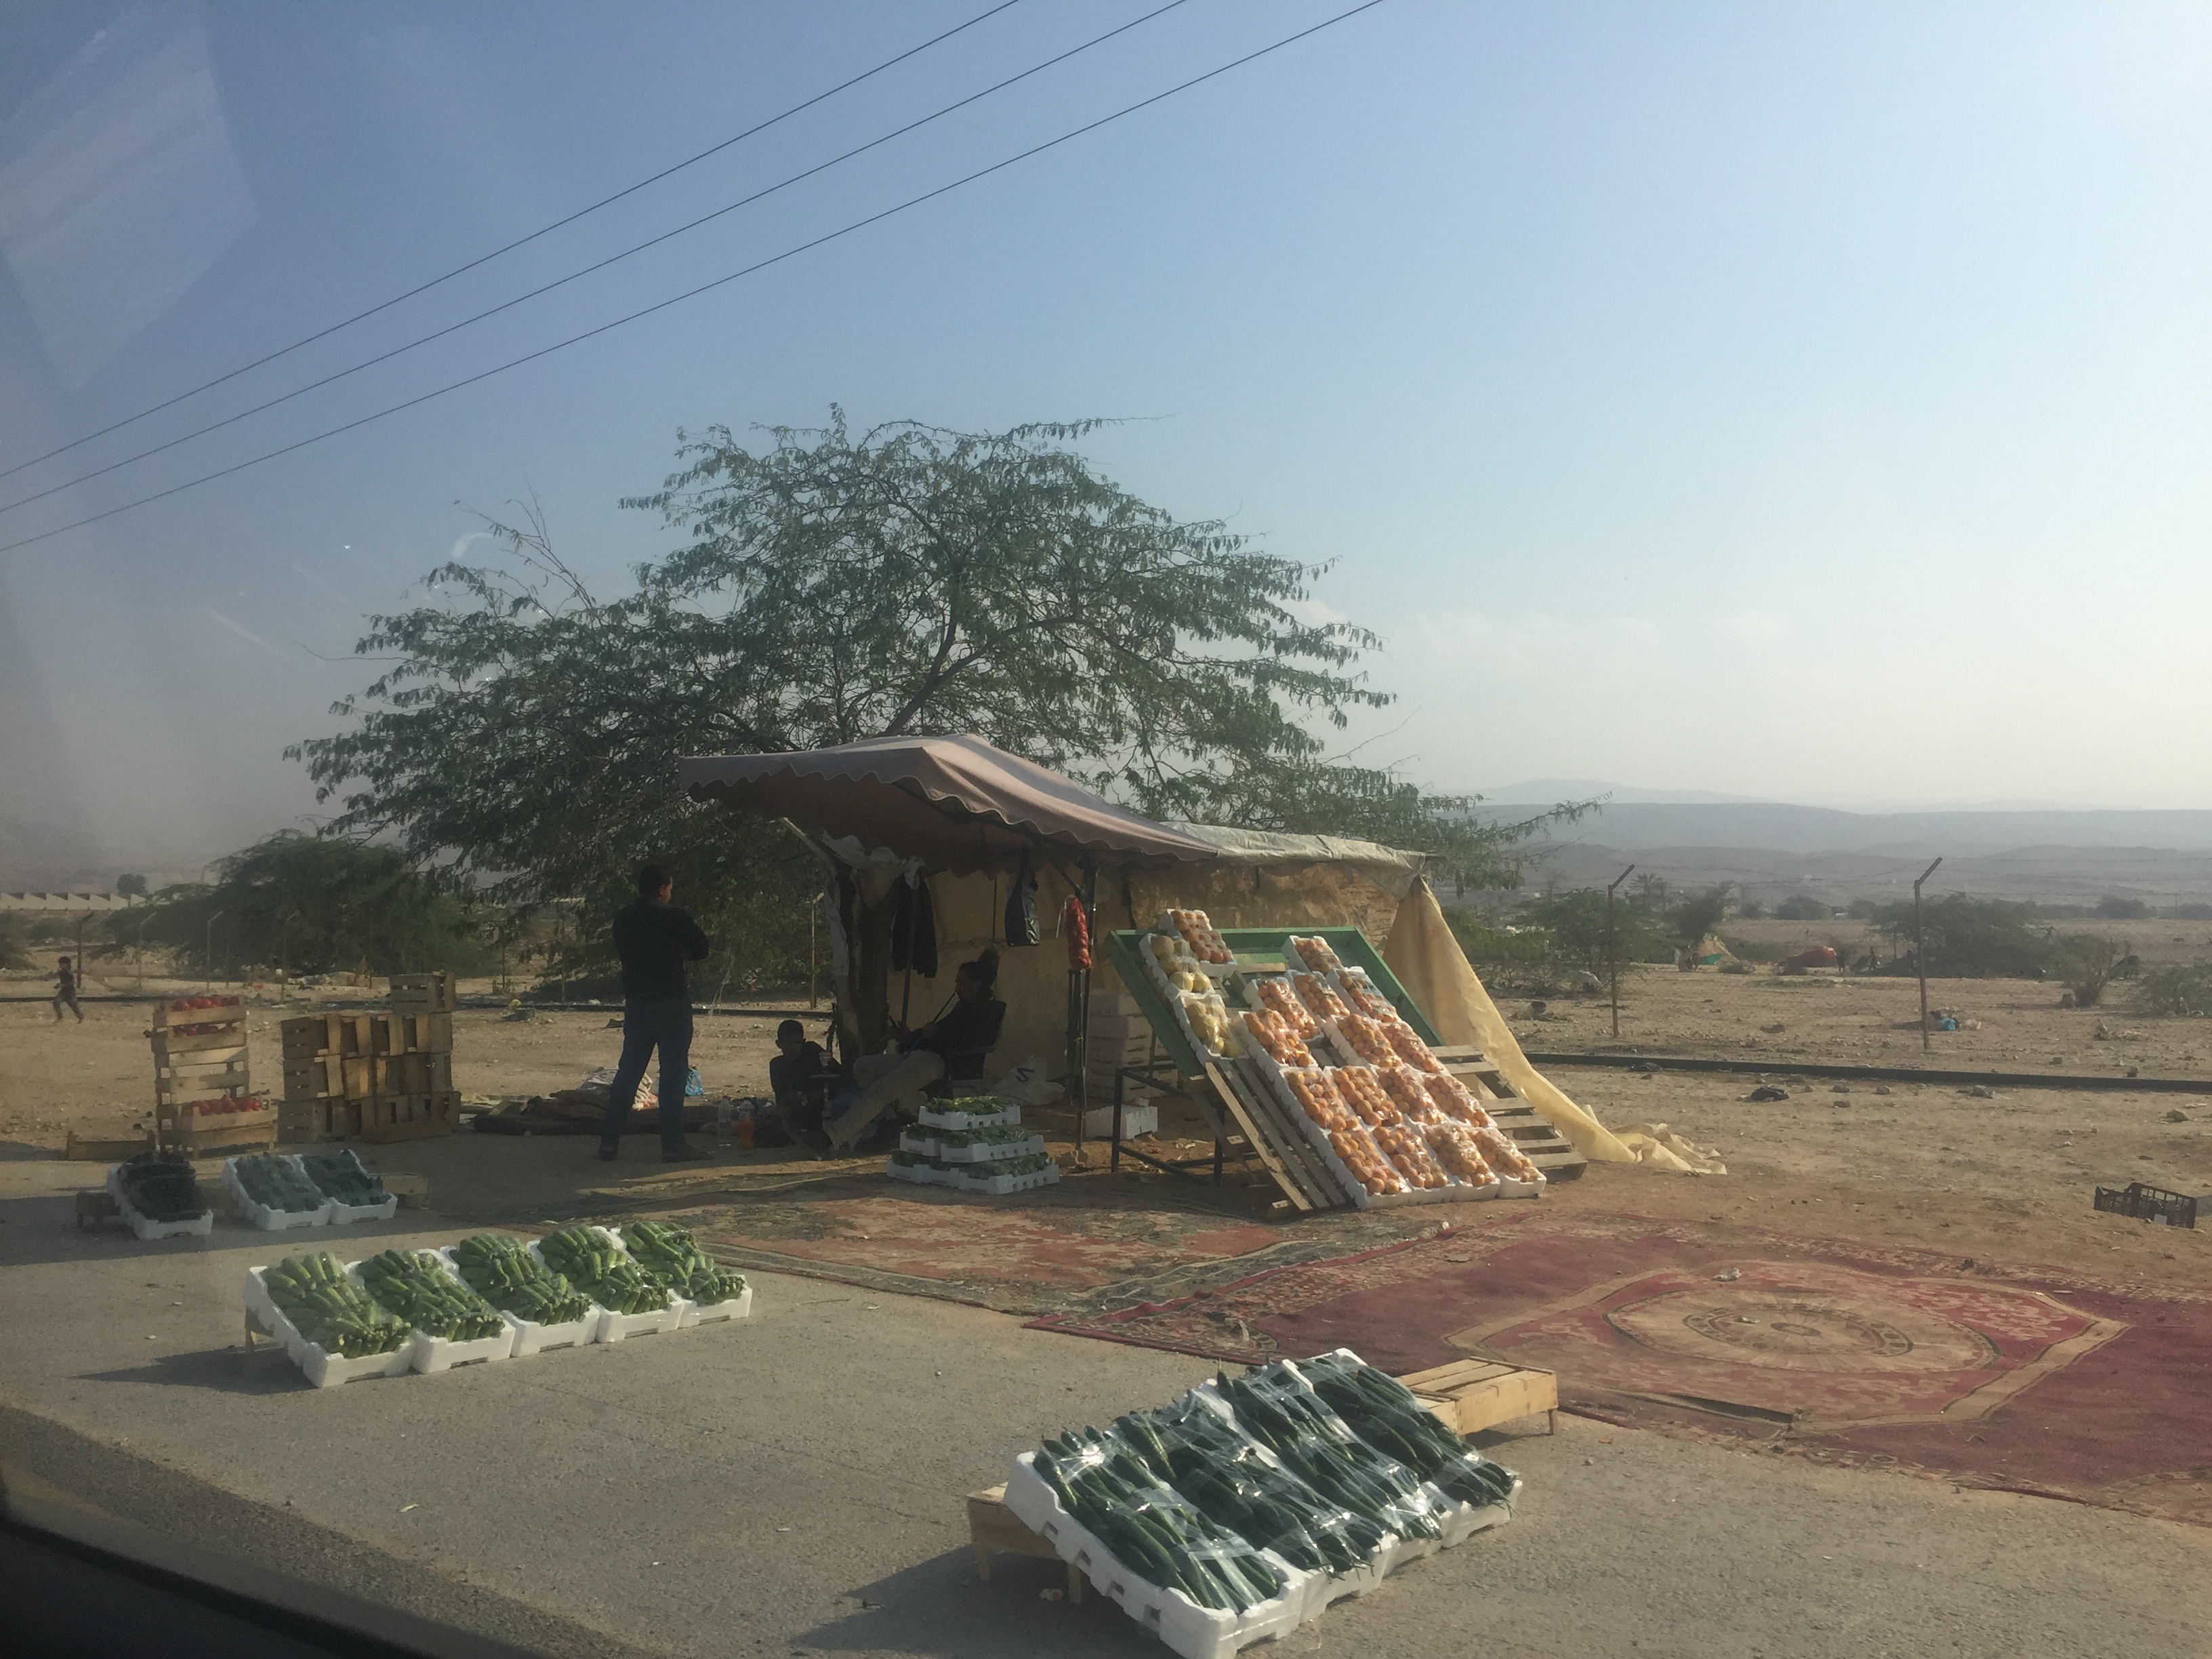 Selling fruits on the road